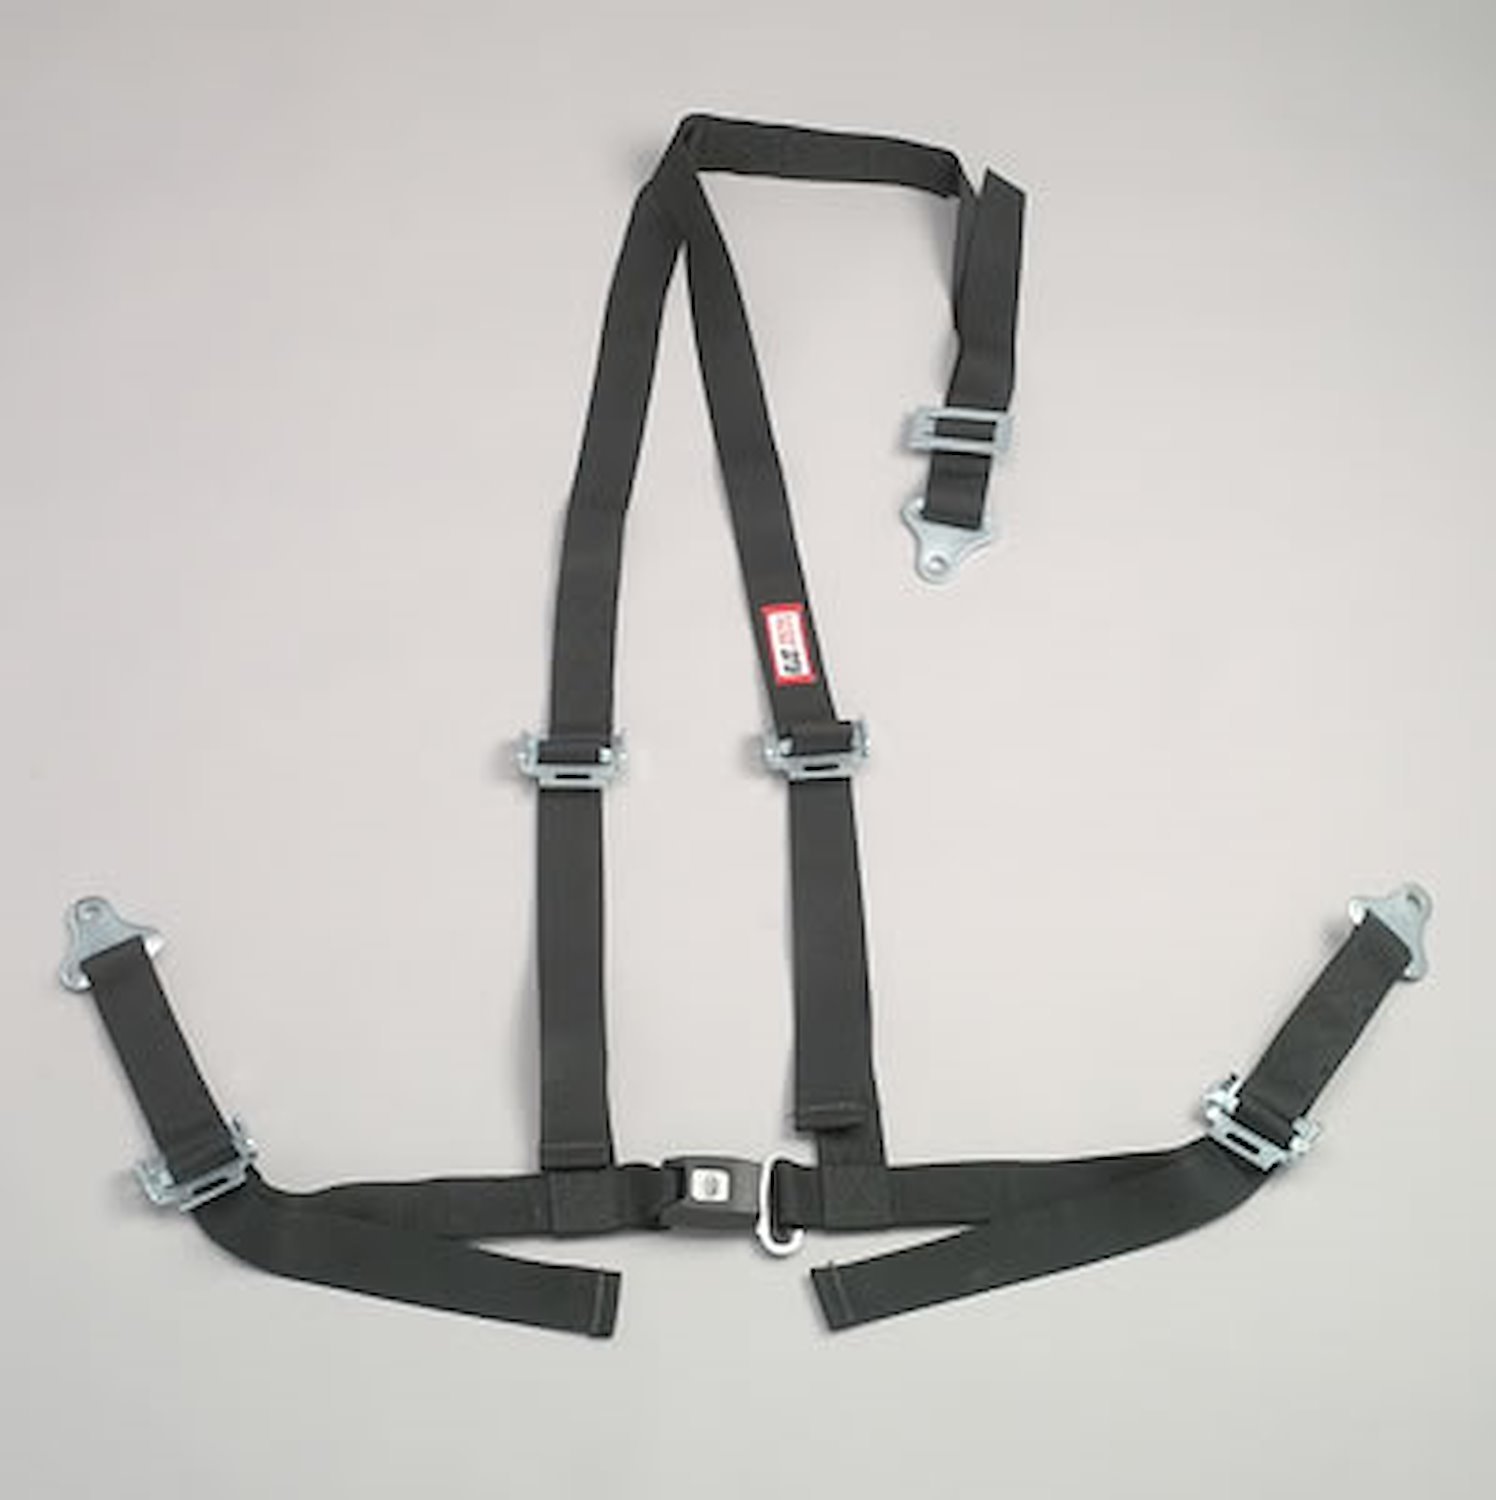 NON-SFI B&T HARNESS 2 PULL DOWN Lap Belt 2 S. H. Individual ROLL BAR Mount ALL WRAP ENDS w/STERNUM STRAP YELLOW